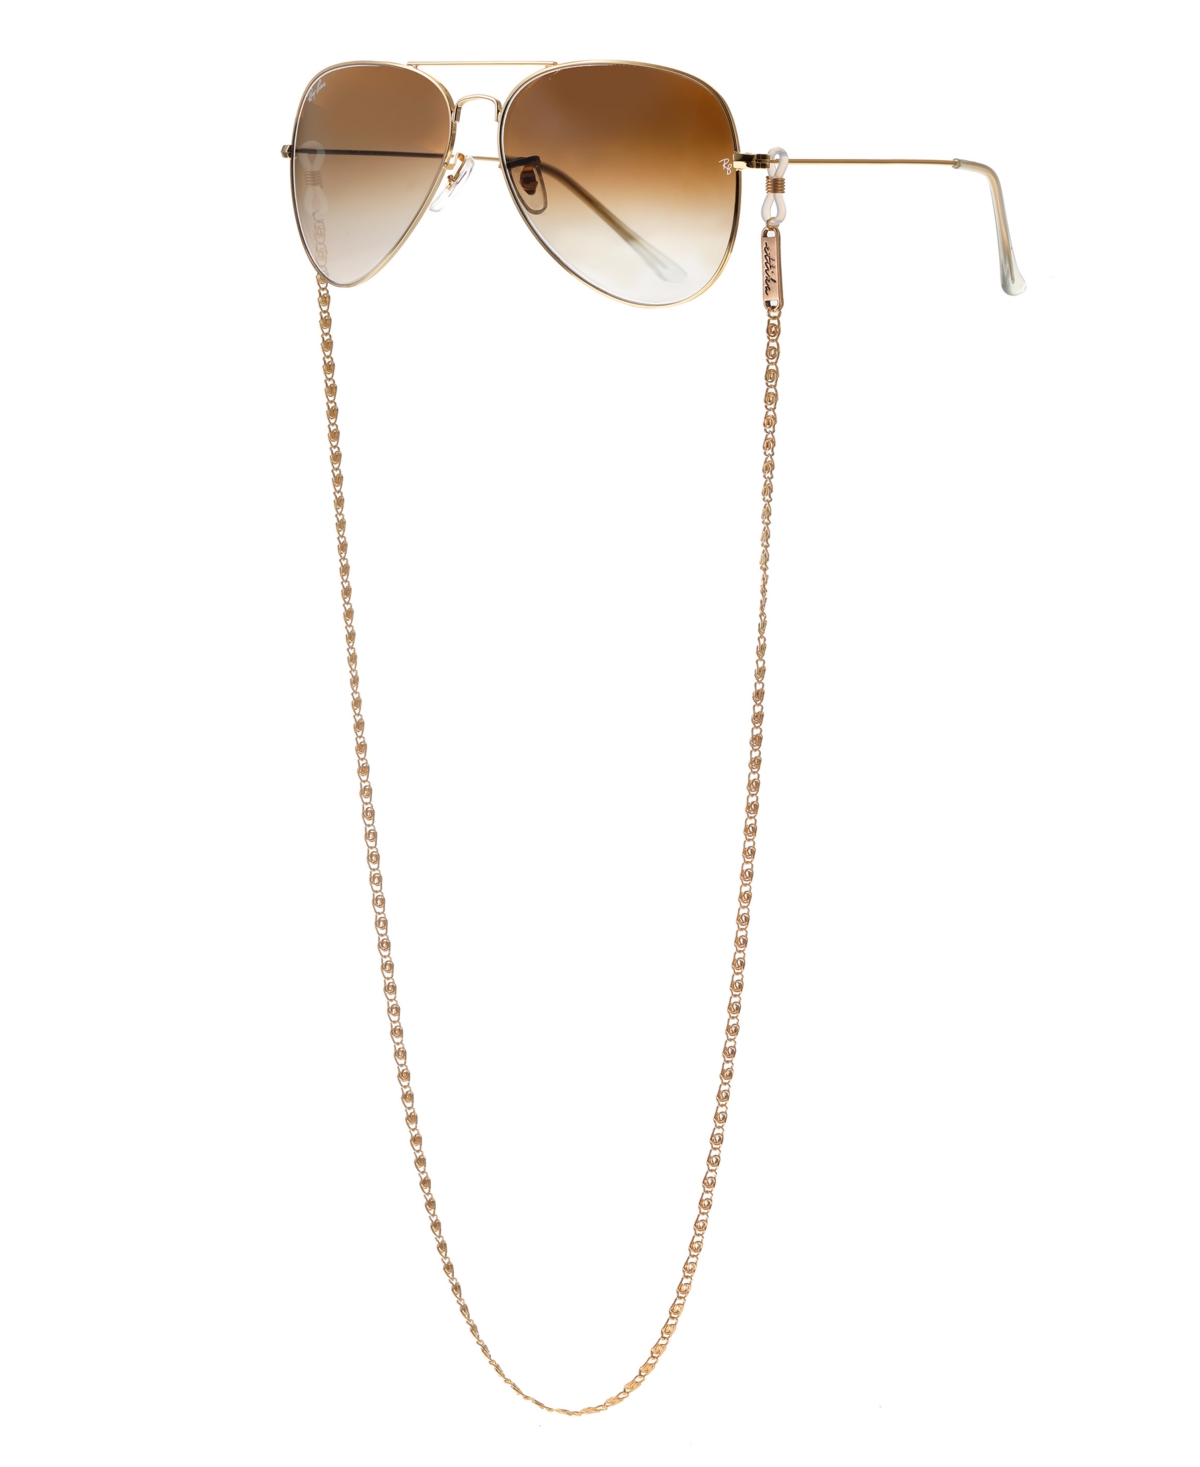 Women's 18k Gold Plated Level Up Glasses Chain - Gold-Plated